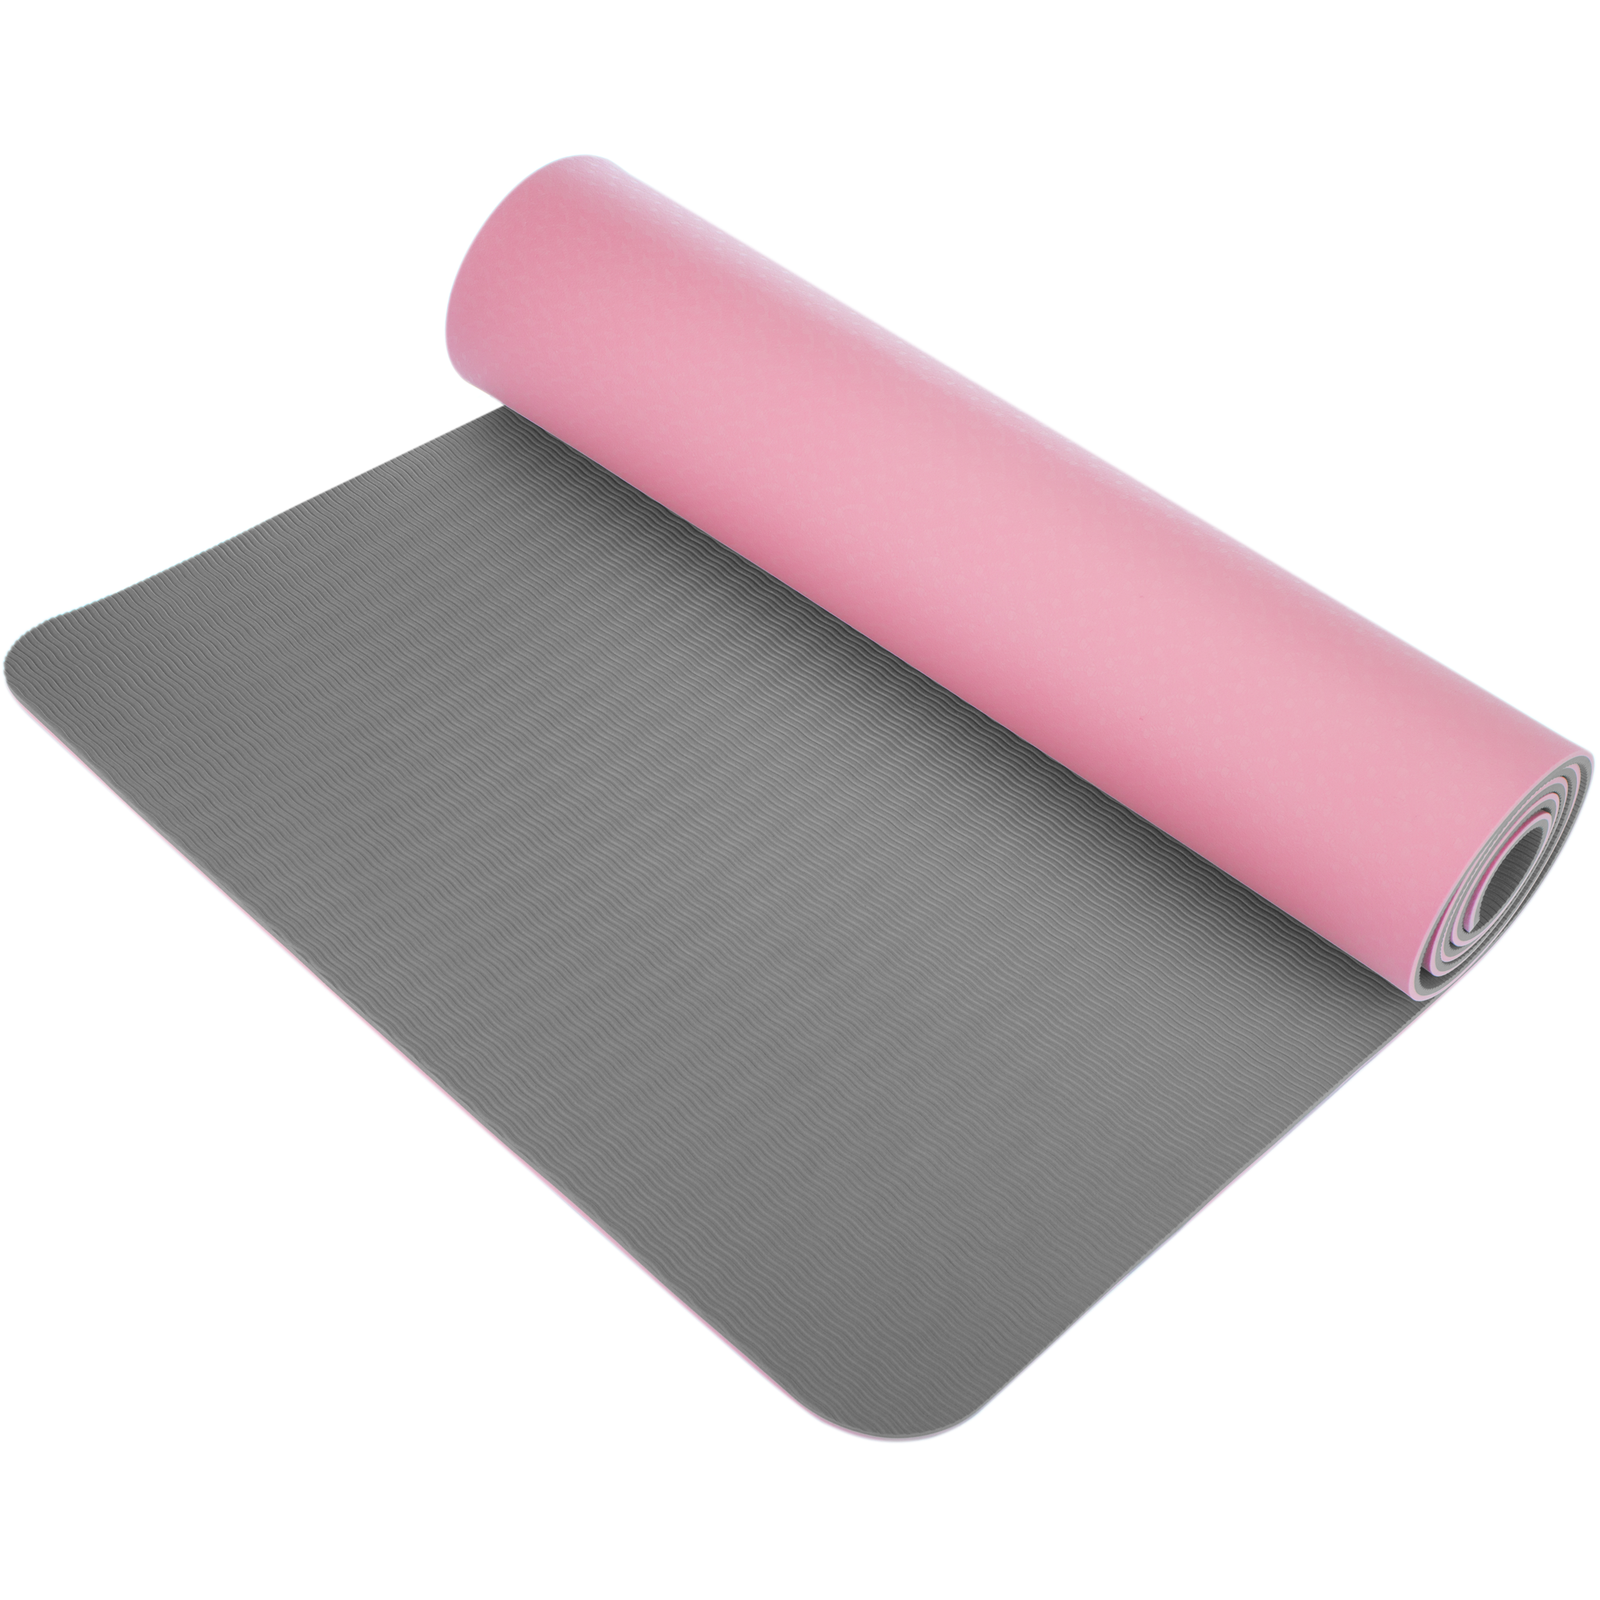 Non-slip Double Layer Pink Yoga Mat 183x61x0.6 cm - Cablematic